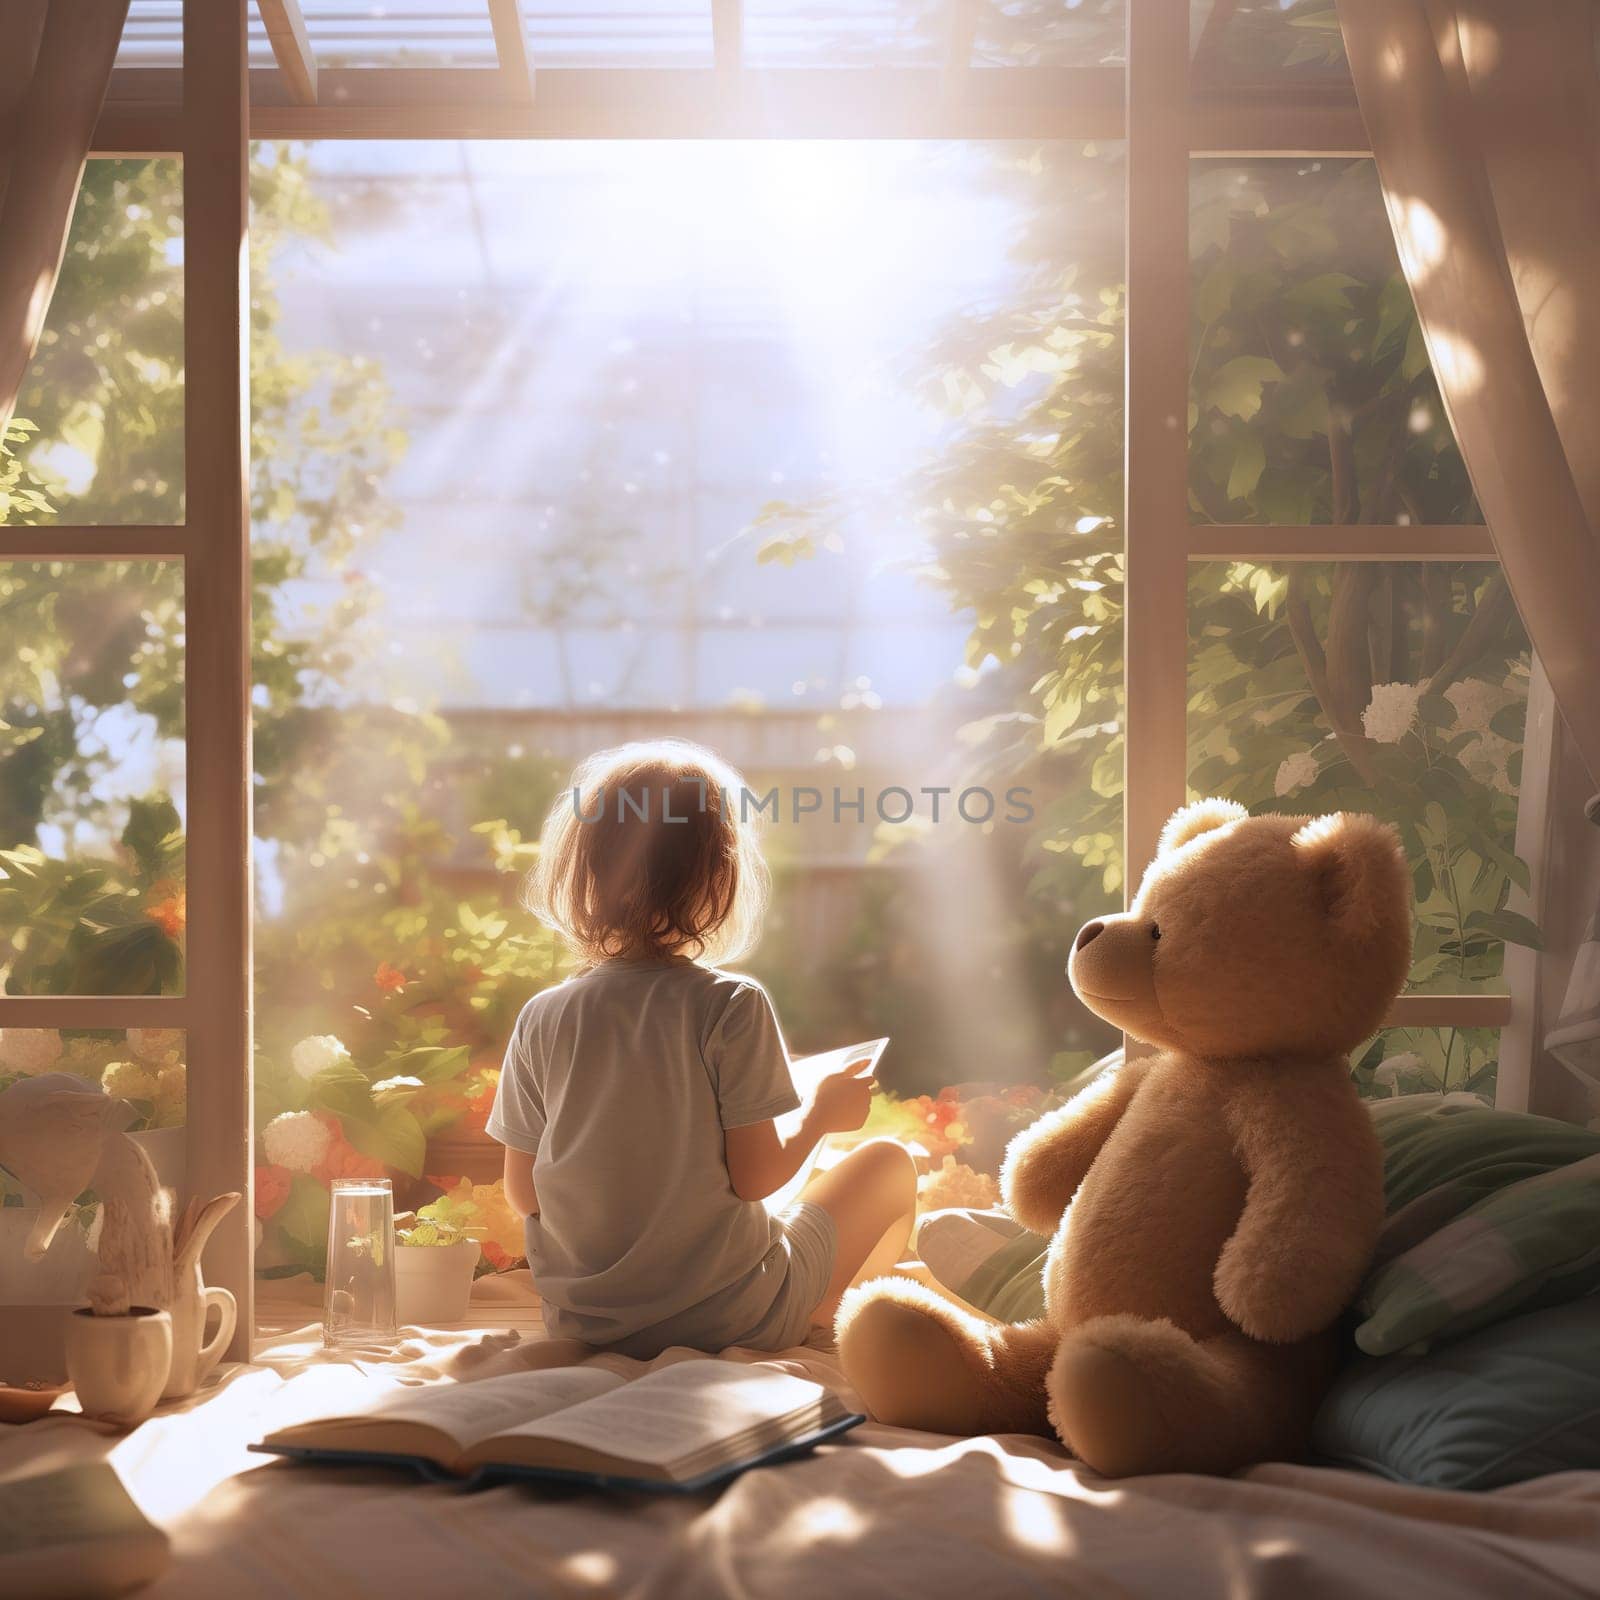 Cute little boy prefers to read a book instead of playing with toys. A boy sits by an open large window, next to a teddy bear, in front of which lies an open book. Morning soft light